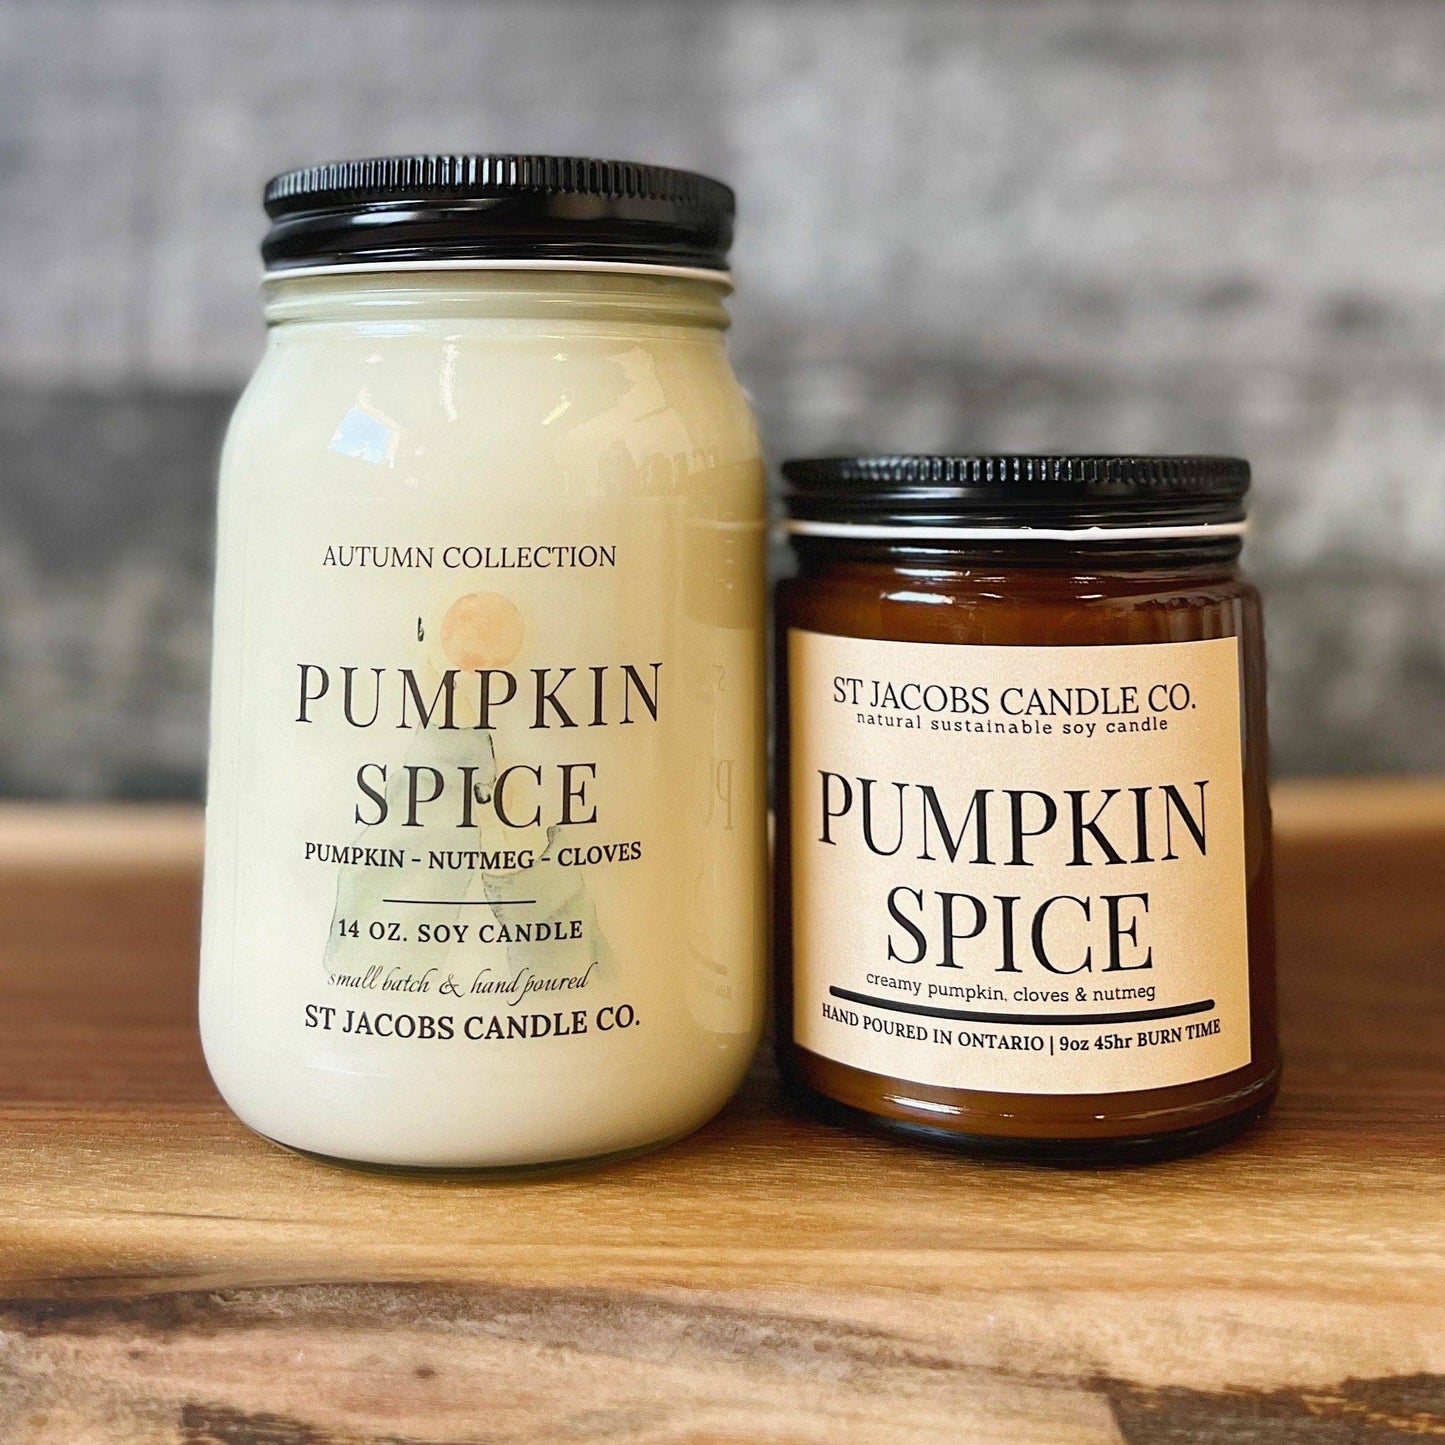 St Jacobs Candle Co. - PUMPKIN SPICE 🍂 Autumn 2022 Soy Candle Collection